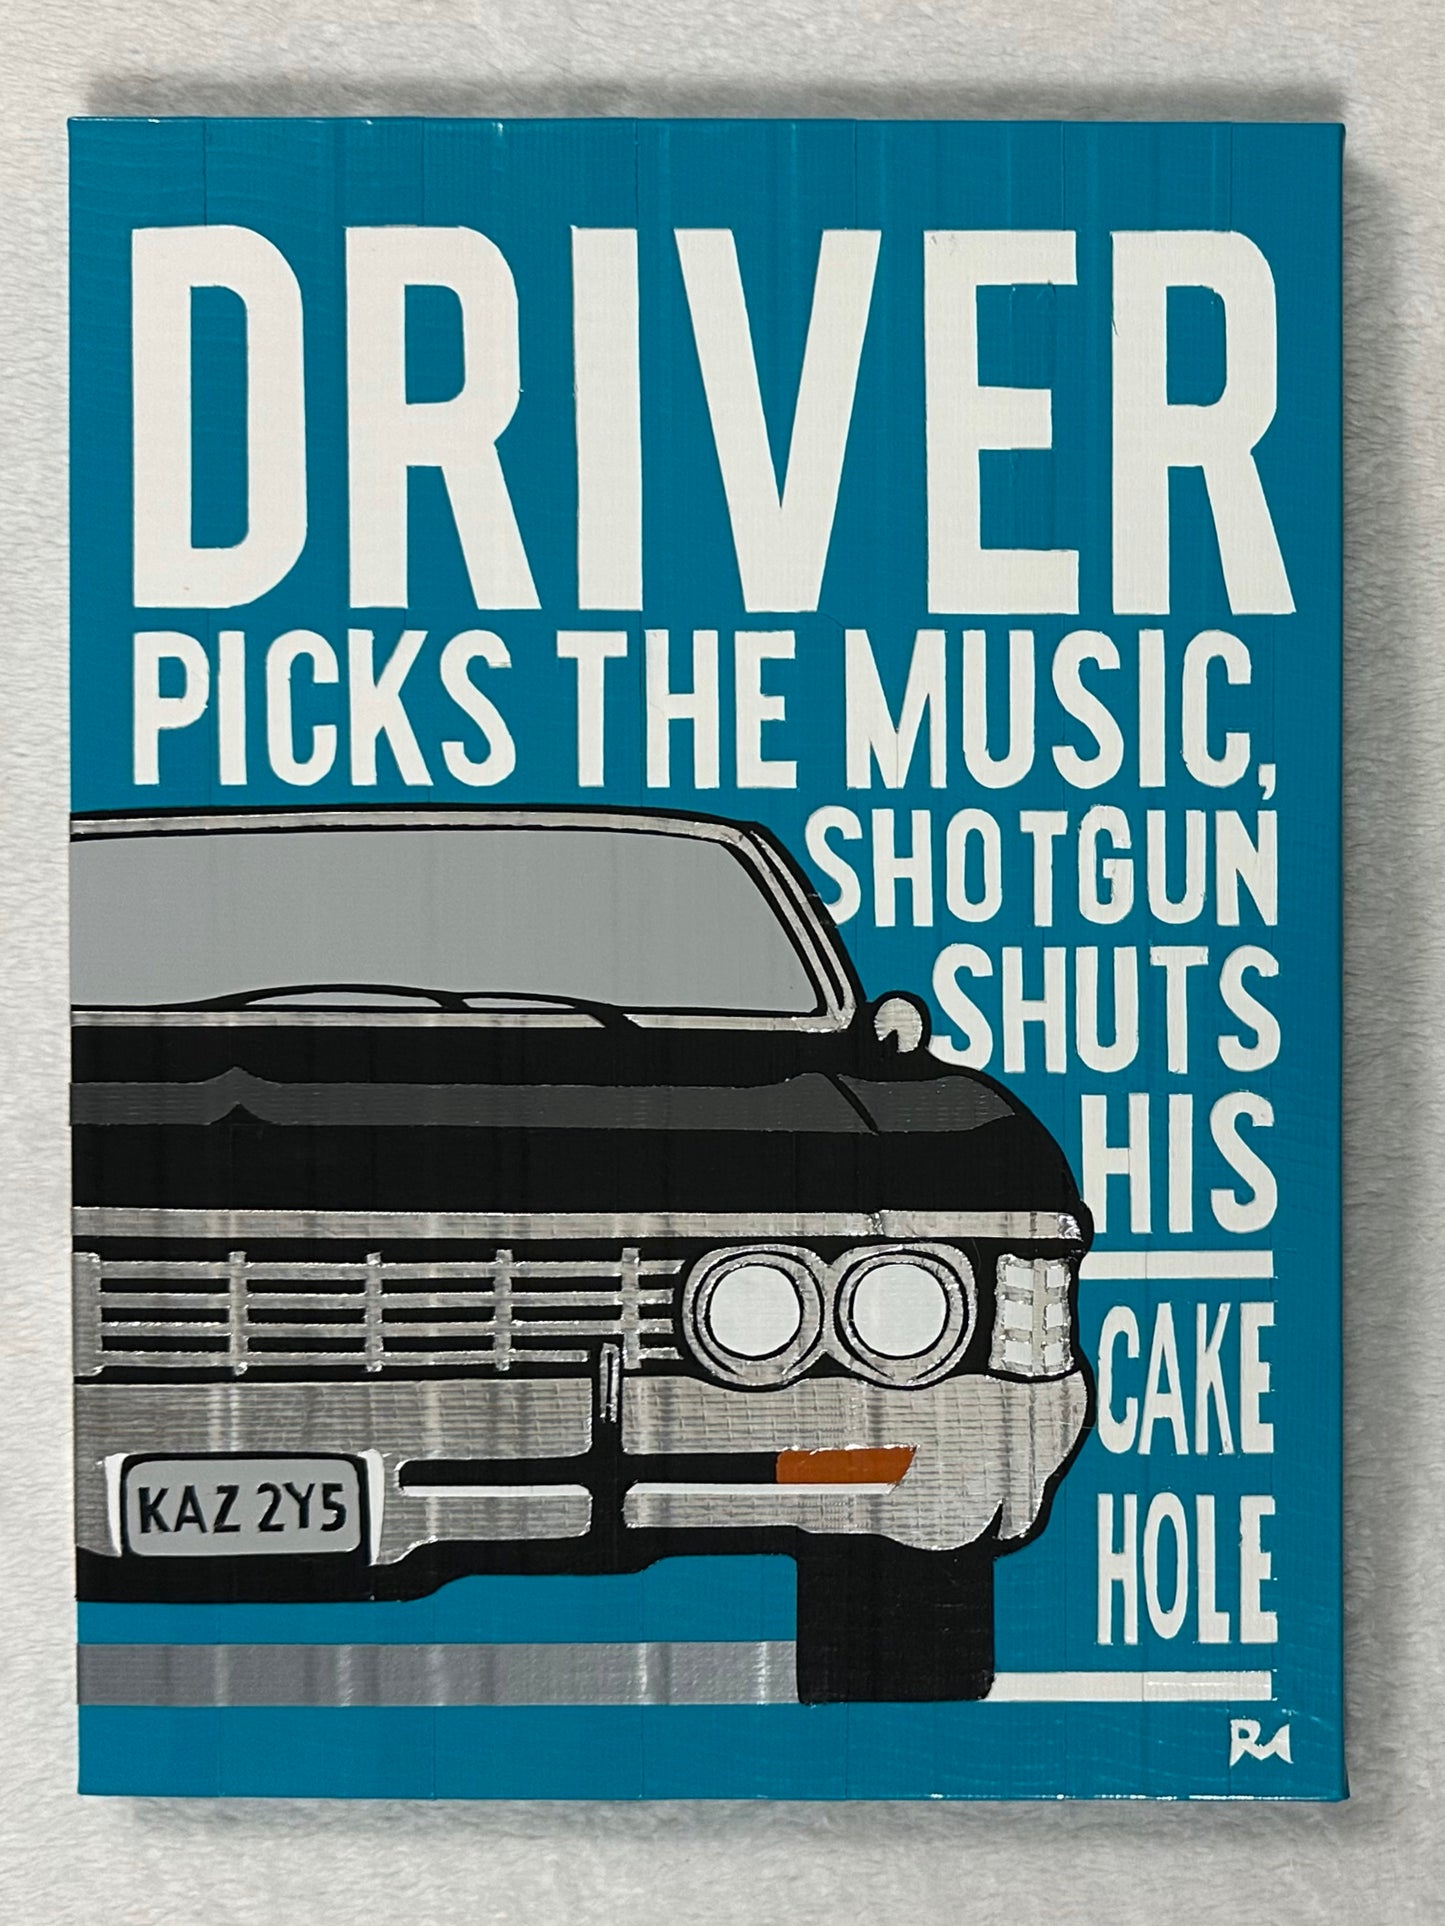 A blue, black, and white poster on a white background. The poster depicts the front side of a 1967 Impala, with white text saying "driver picks the music, shotgun shuts his cake hole." The poster is created with duct tape.